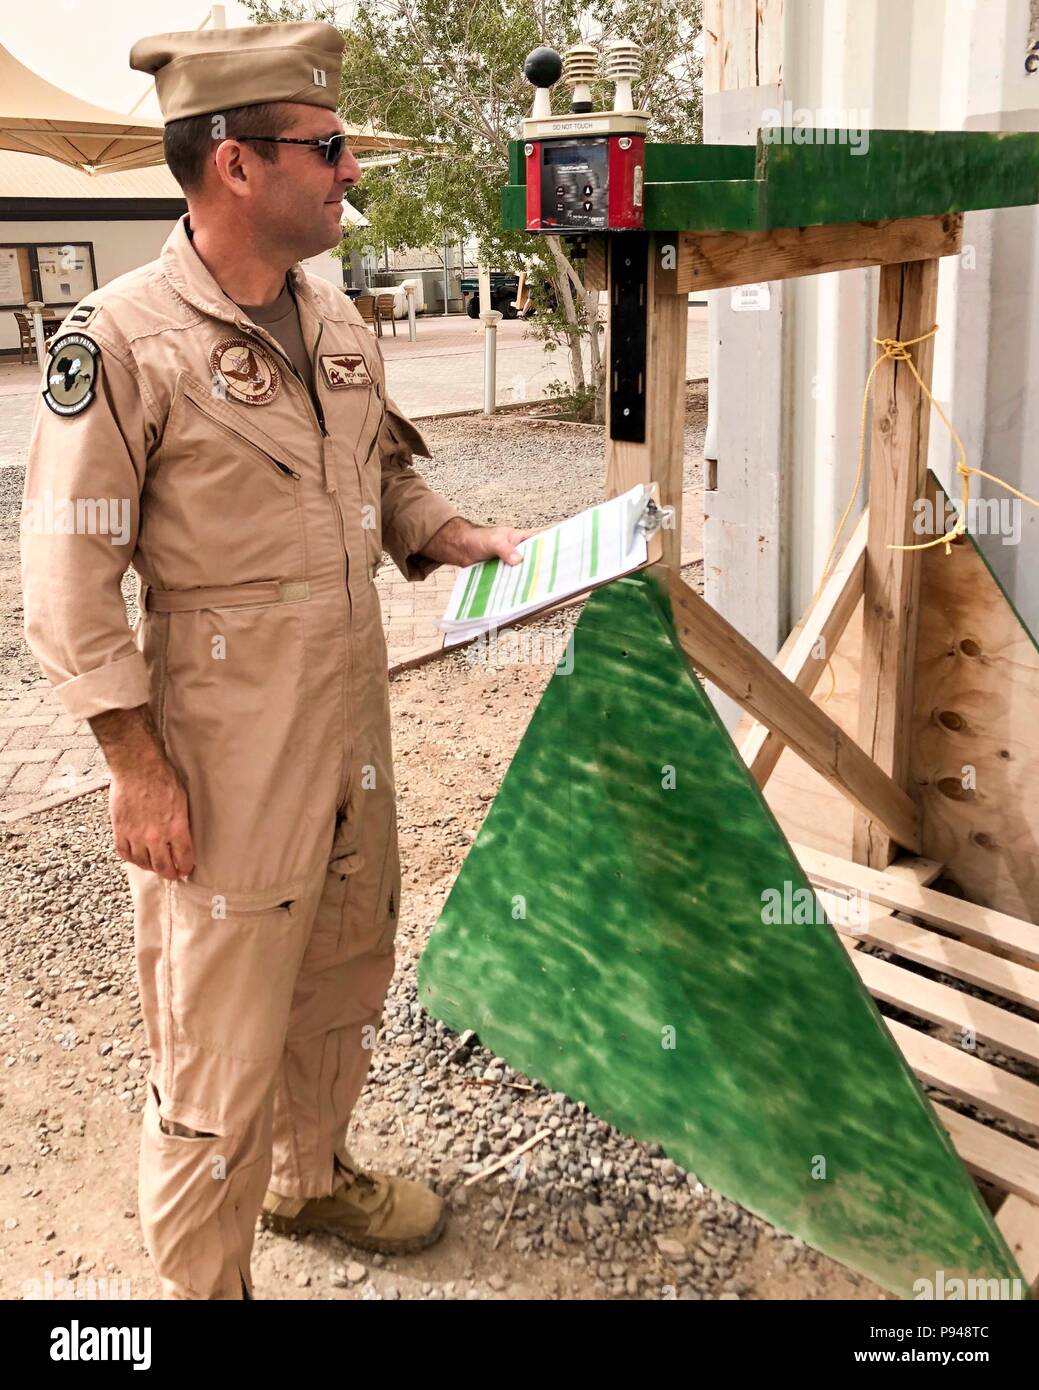 CAMP LEMONNIER, Djibouti – Camp Lemonnier (CLDJ) Safety Officer, Navy Lt. Rich King, inspects the Wet Bulb Globe Temperature (WBGT) device, which is used to measure environmental conditions during physical exercise, June 6, 2018. CLDJ is scheduled to install a second WBGT unit near the turf field on base. Stock Photo